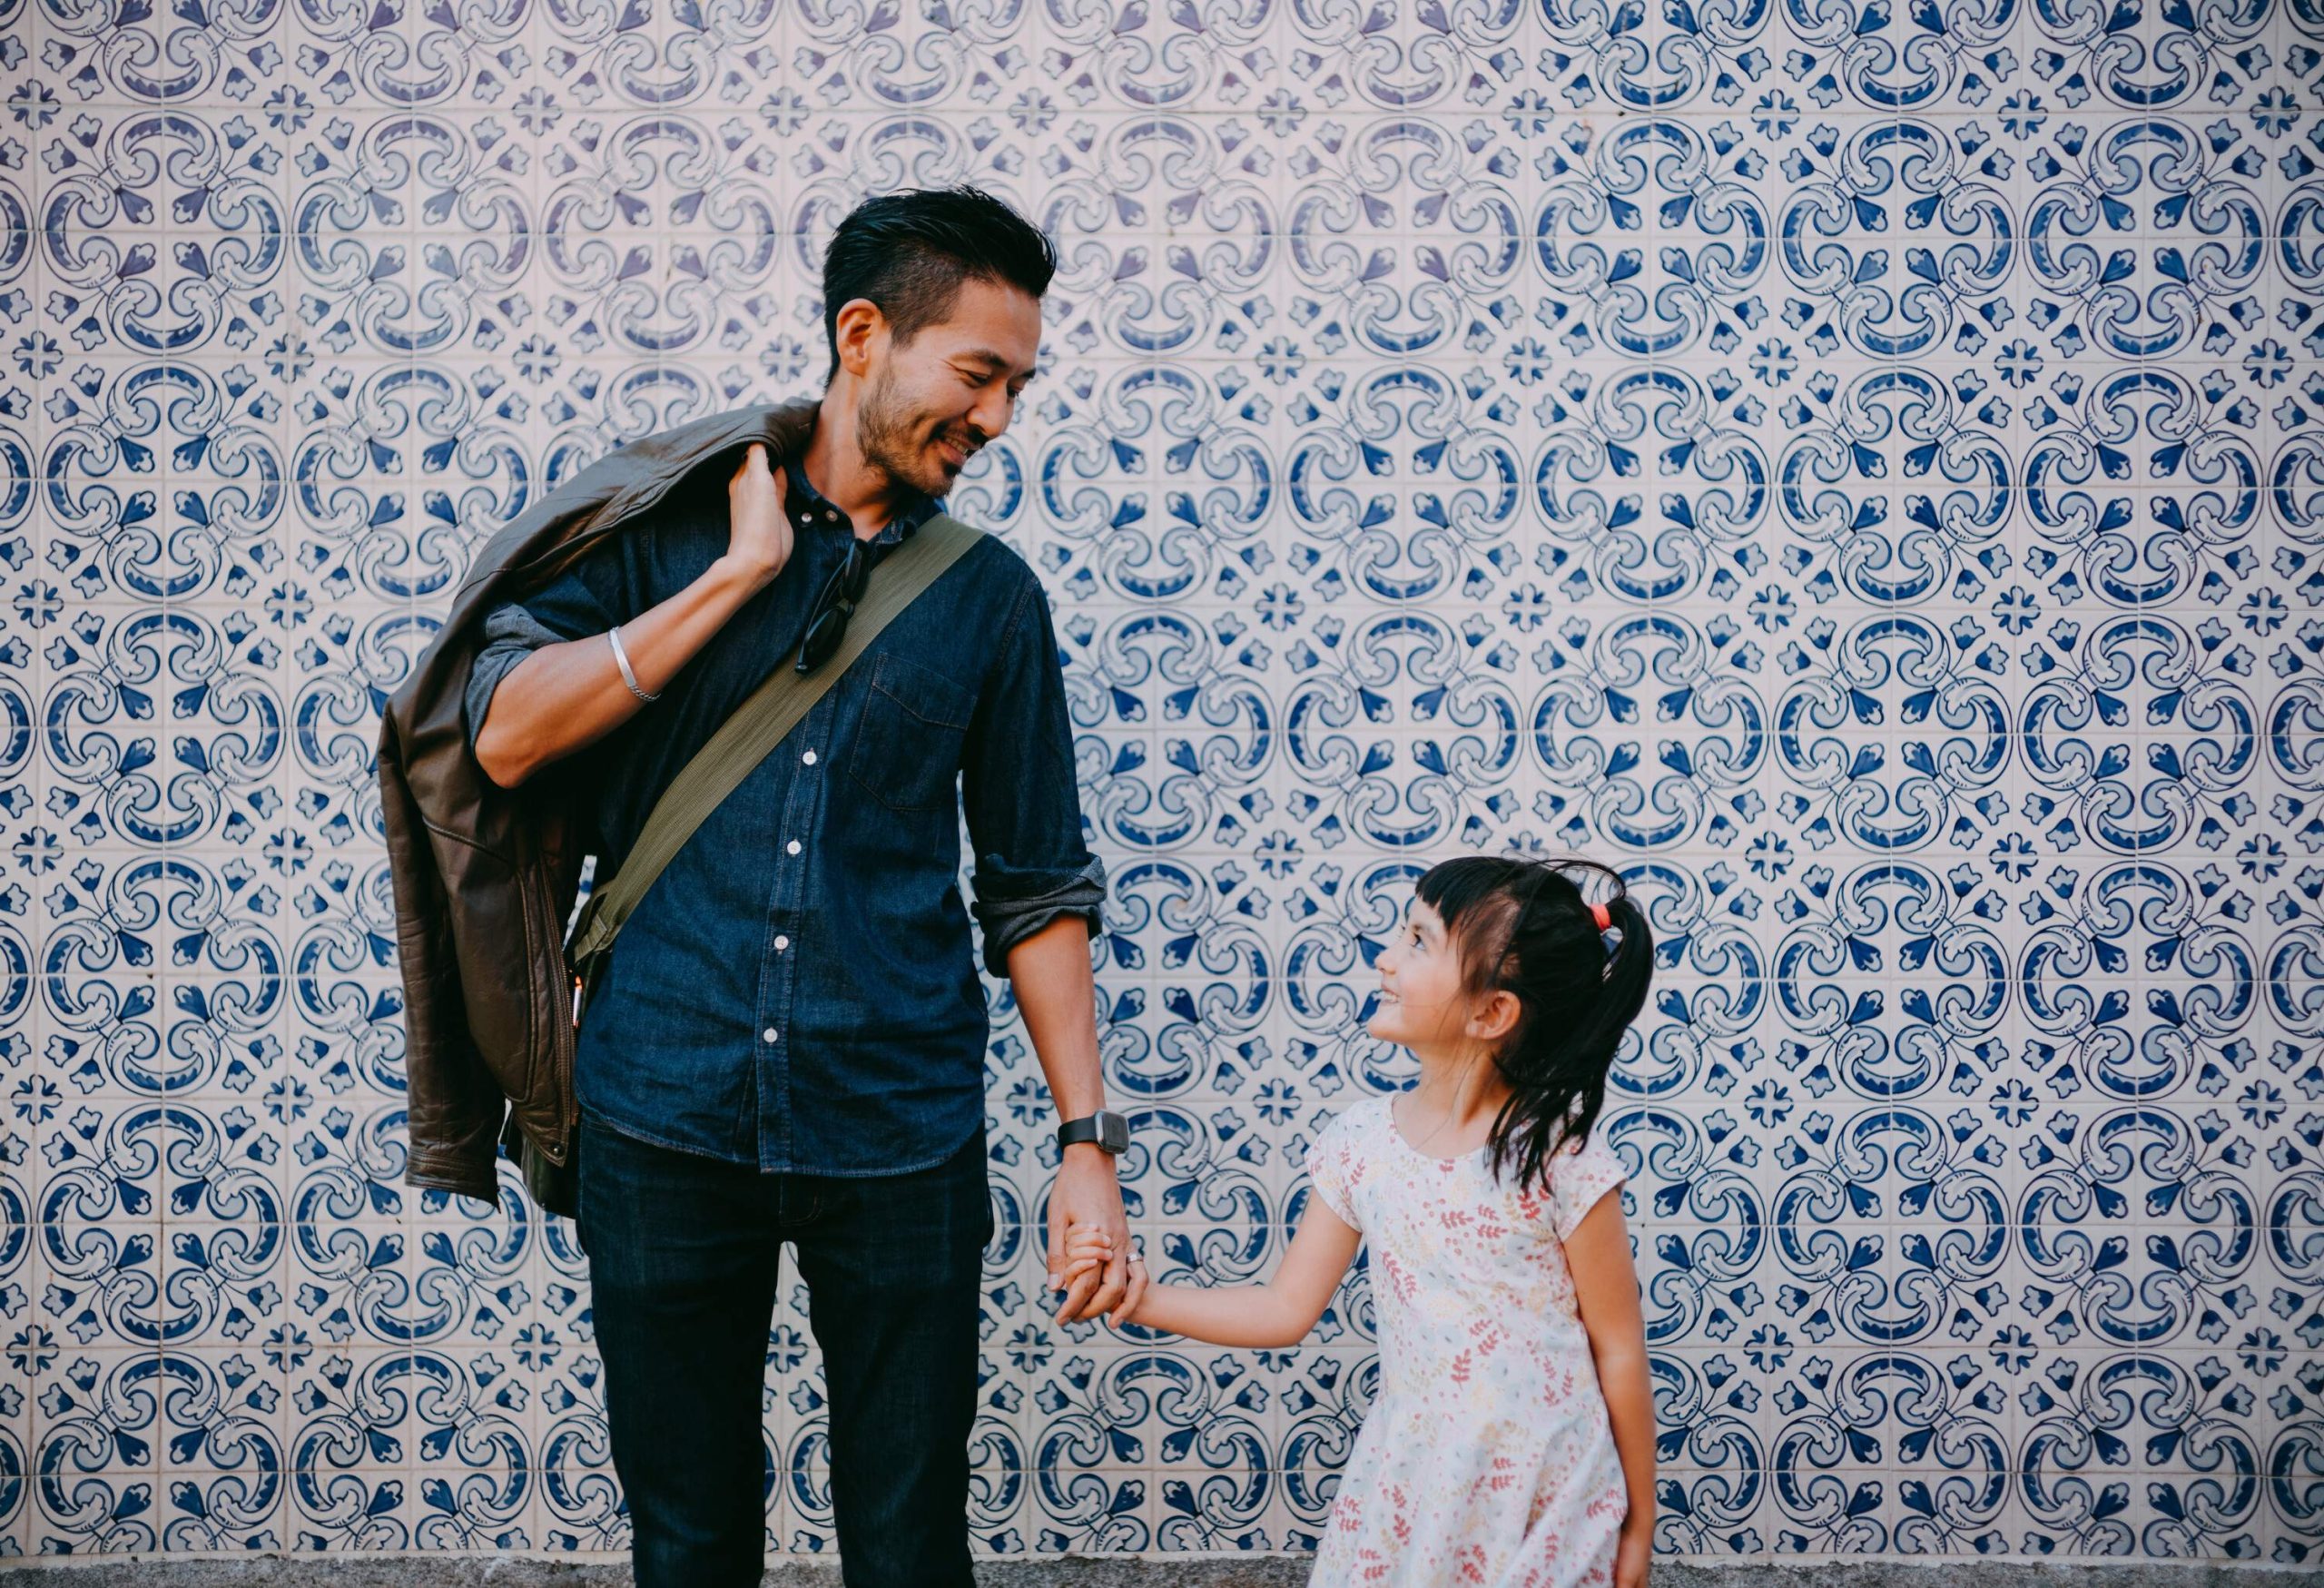 A father standing against a white and blue tiled wall, making eye contact and holding his daughter's hand.